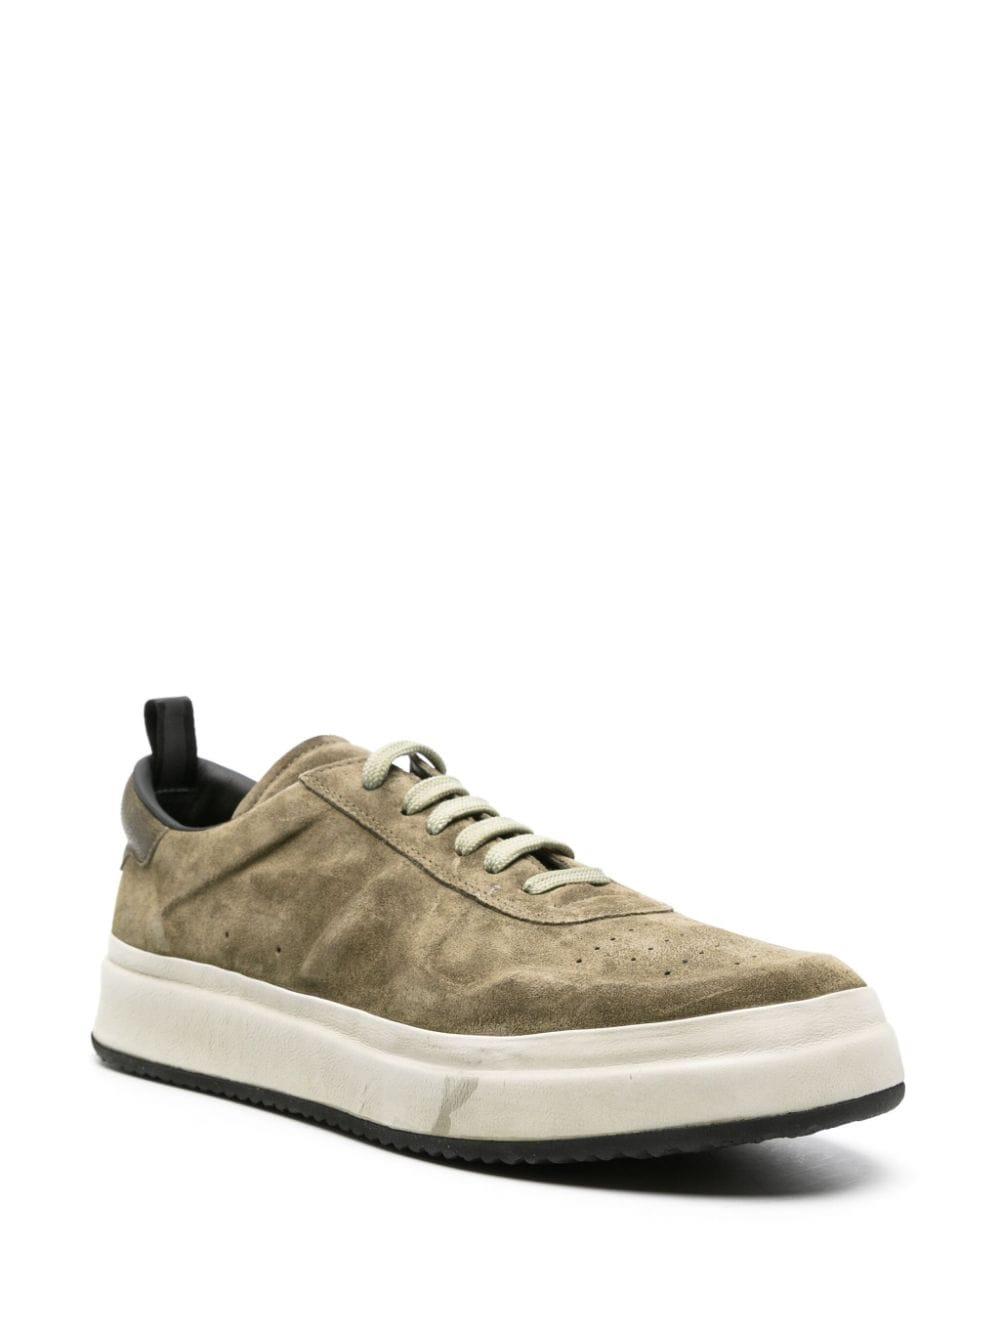 Officine Creative Ace 200 suede sneakers - Green